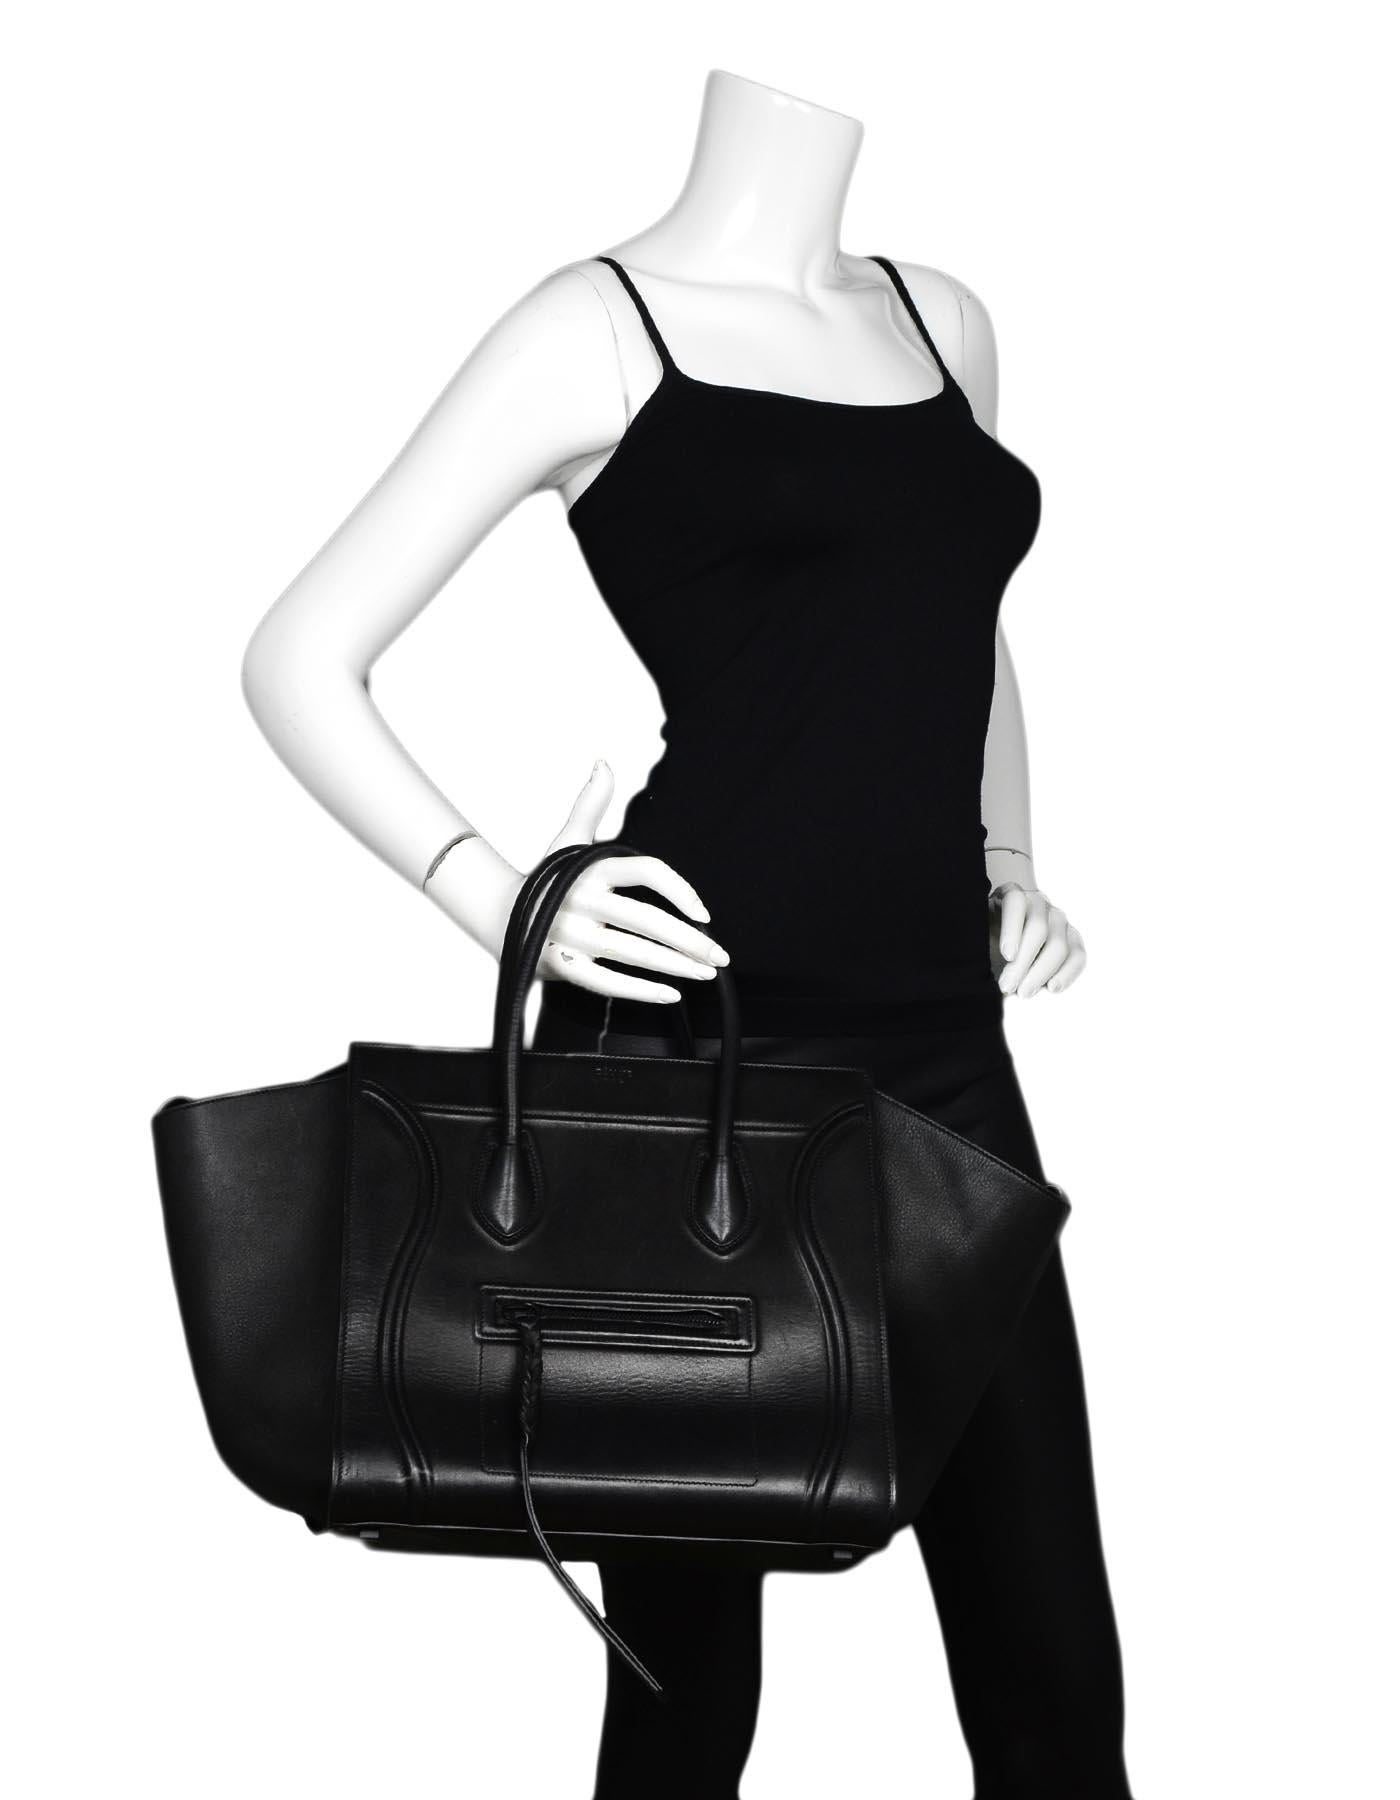 Celine Black Leather Phantom Trapeze Winged Luggage Bag 

Made In: Italy
Color: Black
Hardware: Black
Materials: Leather
Lining: Black suede
Closure/Opening: Open top with strap closure
Exterior Pockets: Front facing zipper pocket
Interior Pockets: